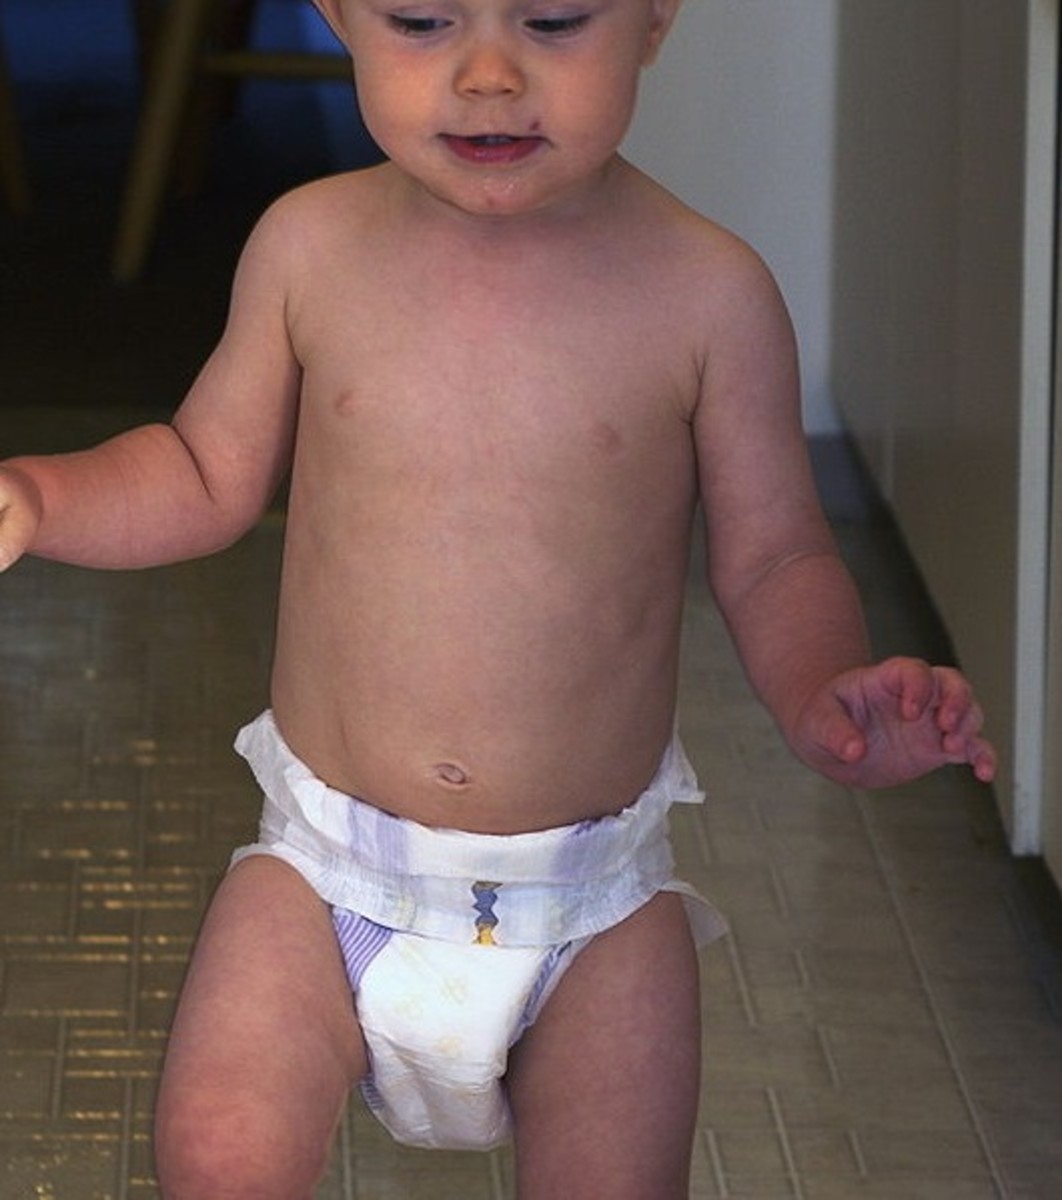 To help avoid diaper rash, diapers should be slightly loose fitting and changed before they're "full" with urine, even if the manufacturer describes them as super- or extra-absorbent